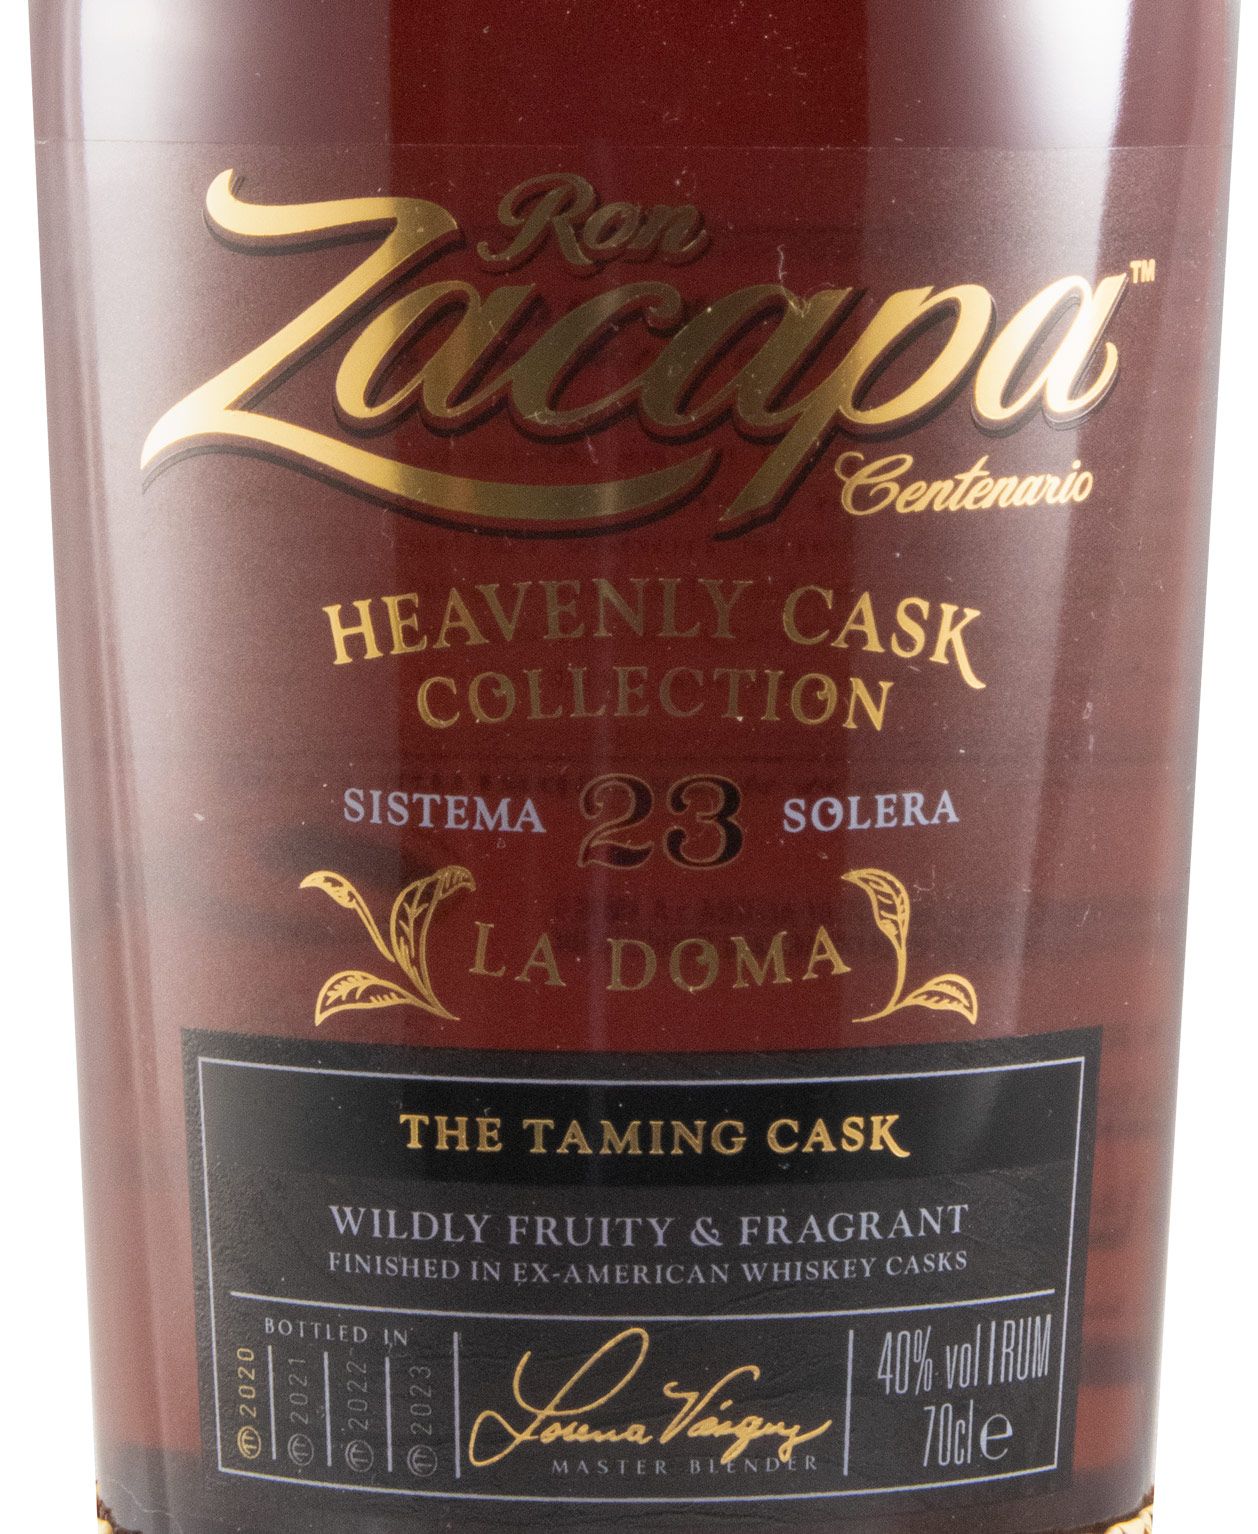 Rum Zacapa La Doma Heavenly Cask Collection 23 years